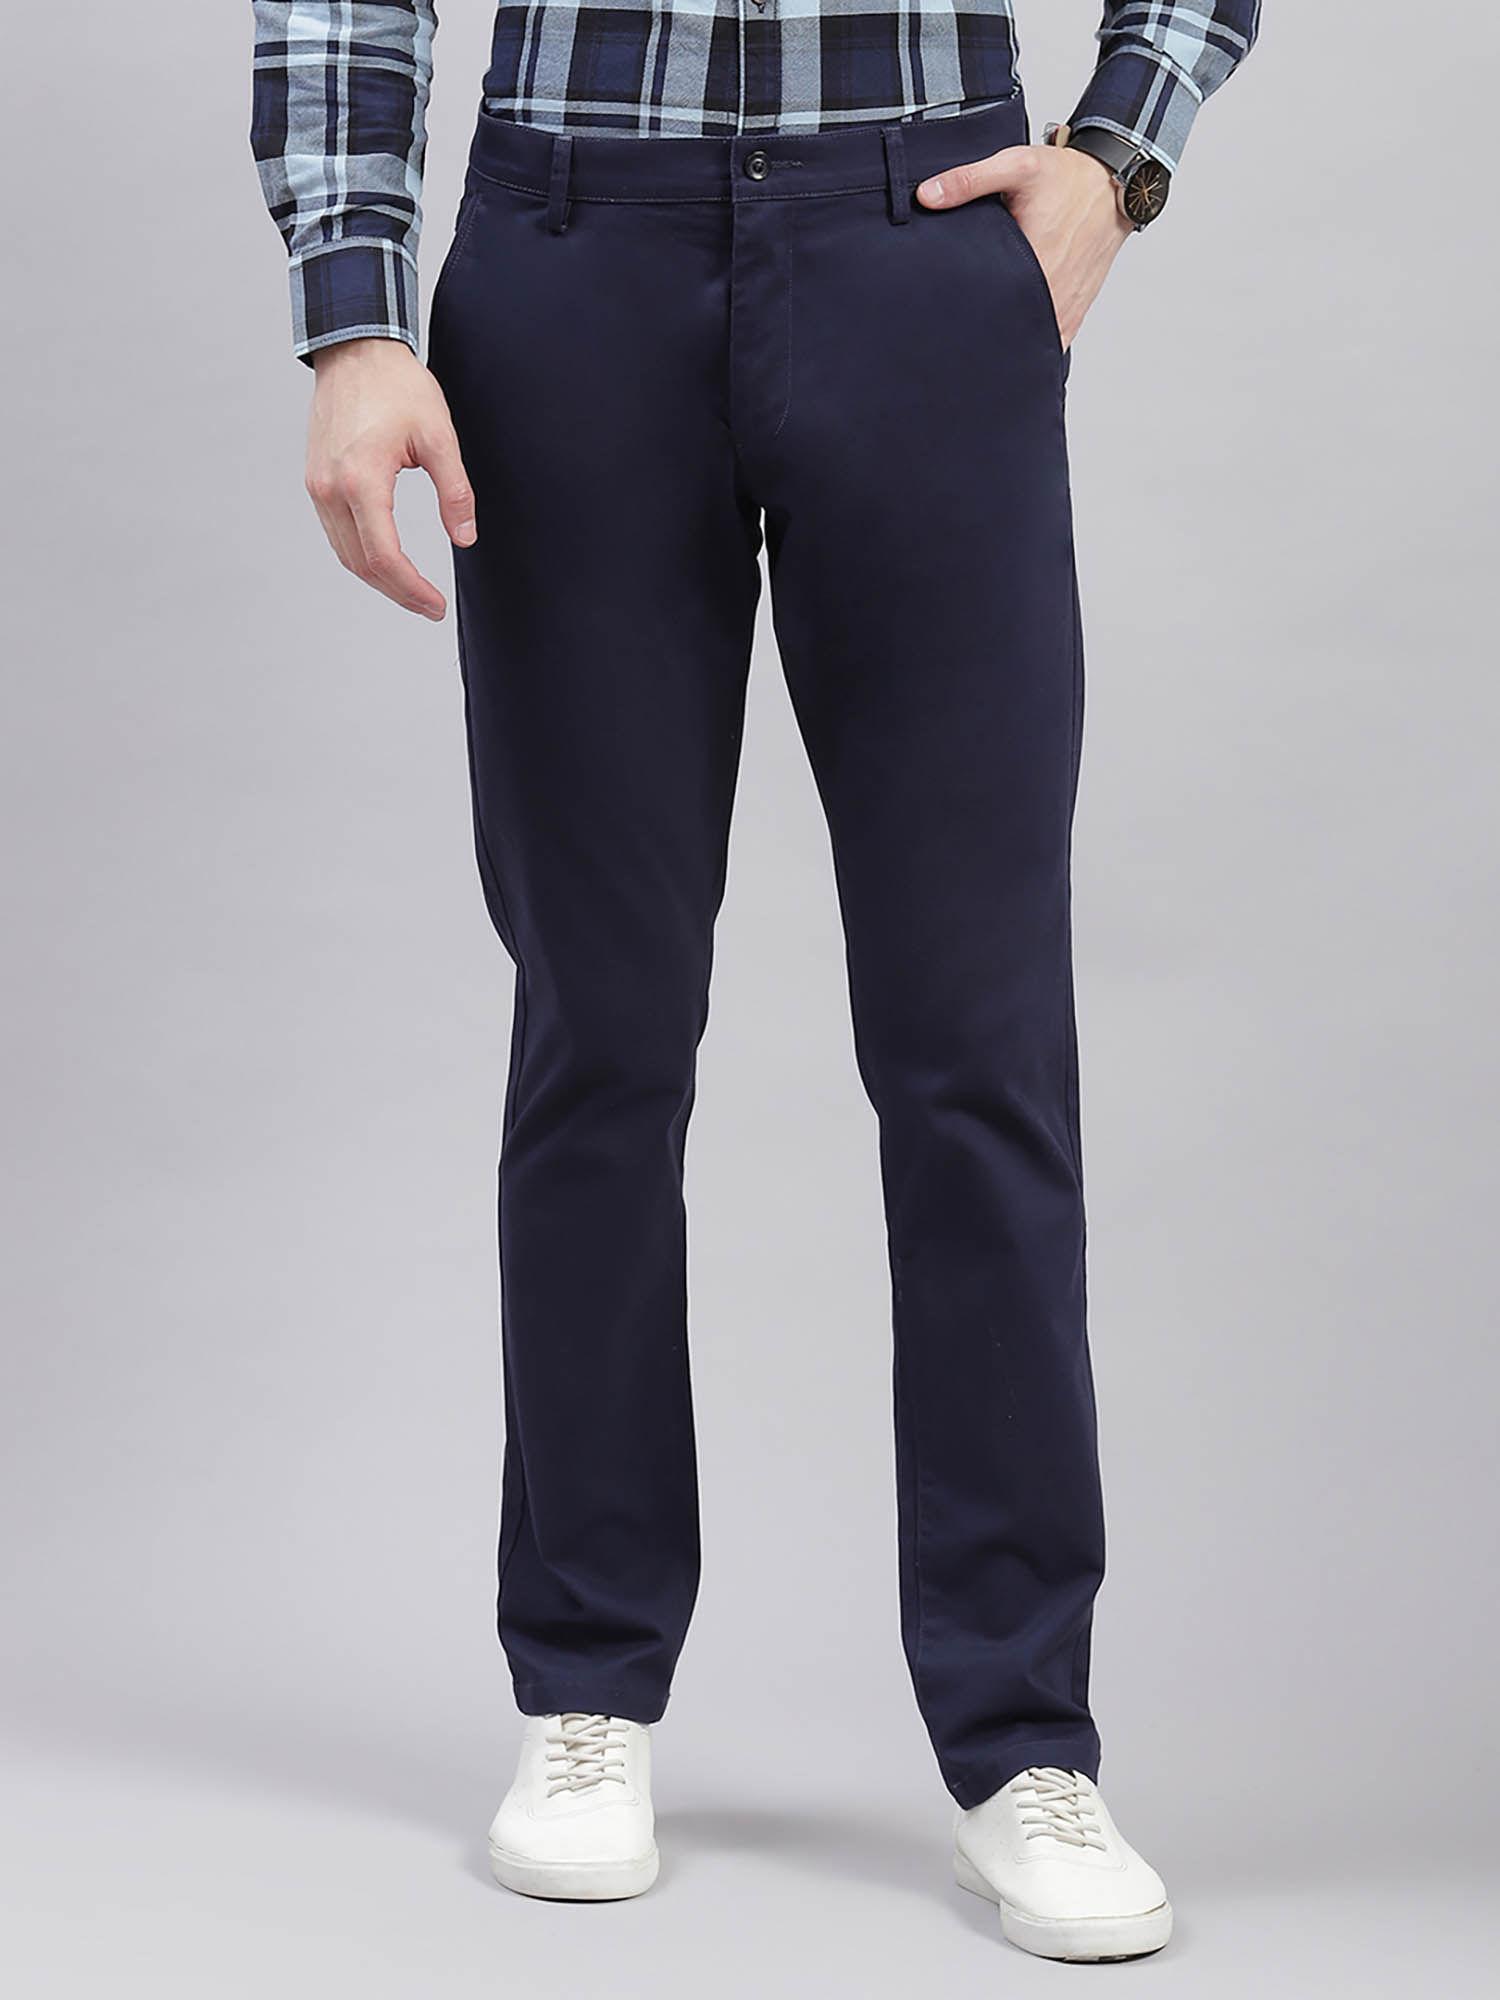 navy-blue-solid-regular-fit-casual-trouser